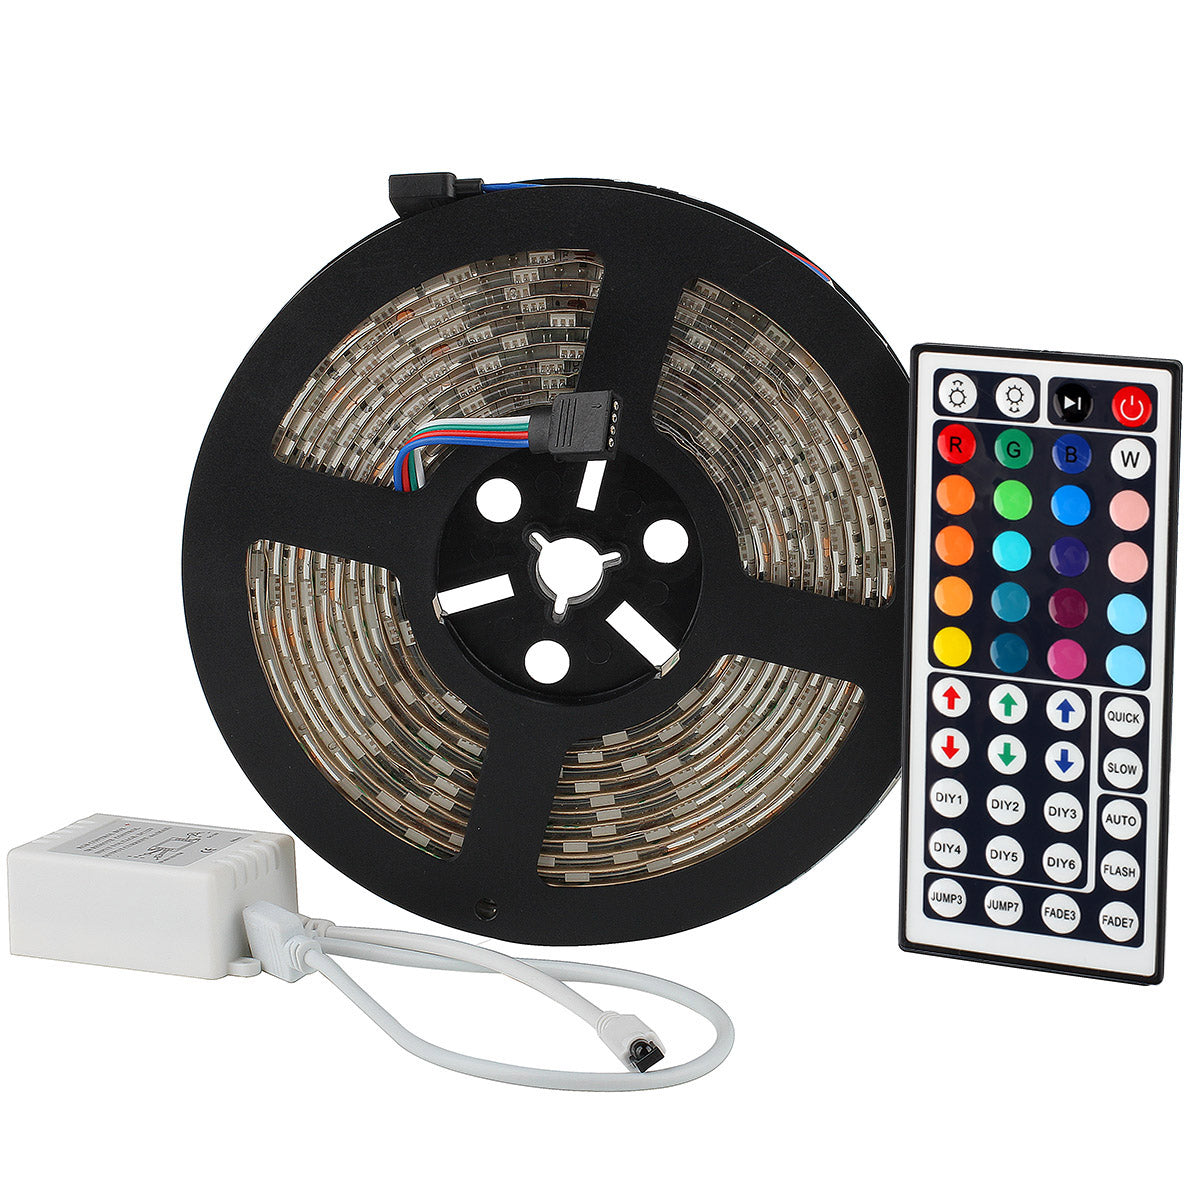 SUPERNIGHT 16.4FT SMD 5050 Waterproof 300LEDs RGB Flexible LED Strip Light Lamp Kit + 44Key IR Remote Controller(Power supply is not included)